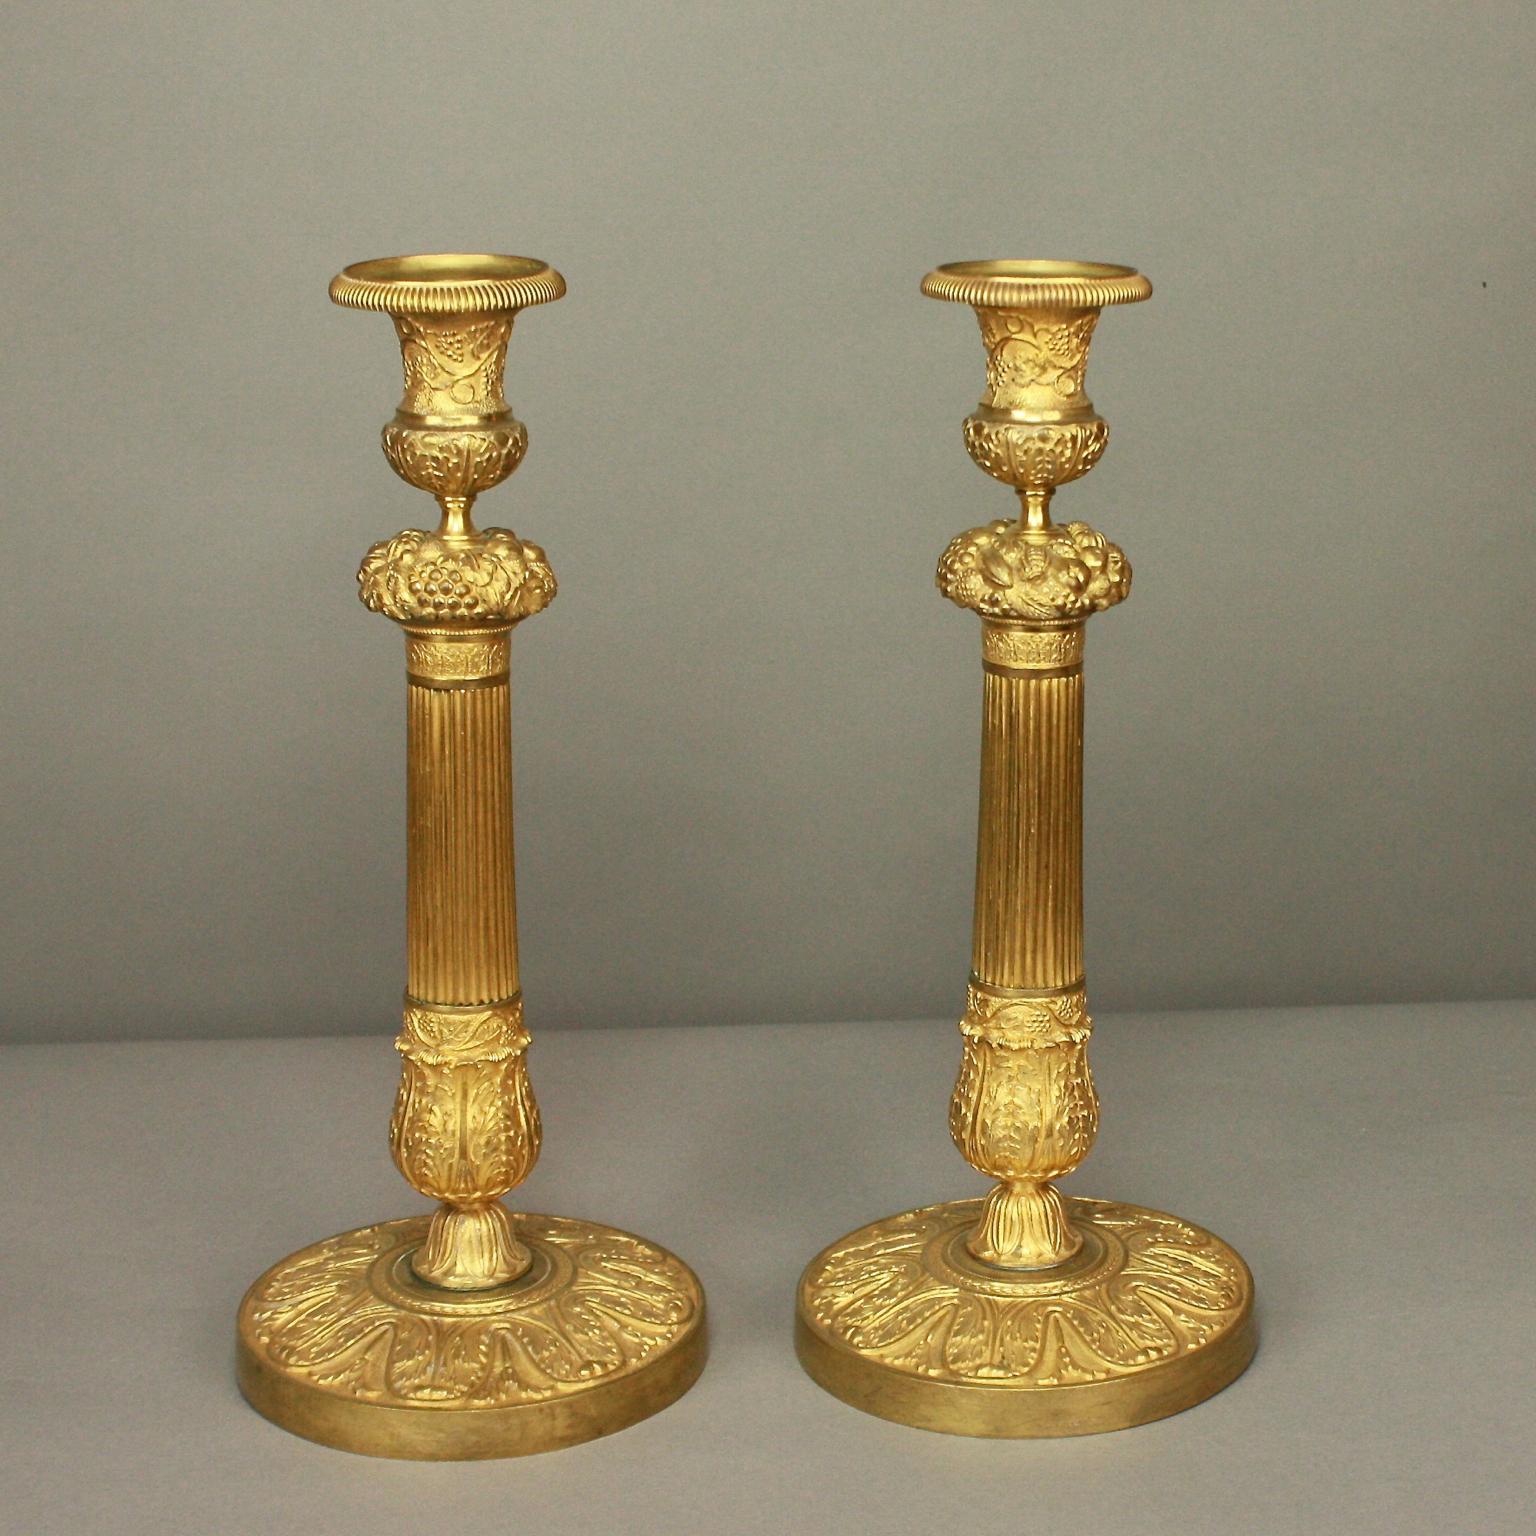 Pair of French Early 19th Century Charles X Gilt-Bronze Candlesticks, circa 1825

Pair of late Empire / Charles X gilt bronze candlesticks, each with a fluted stem, highlighted on top by a basket of flowers and finely chased foliate on the bottom of